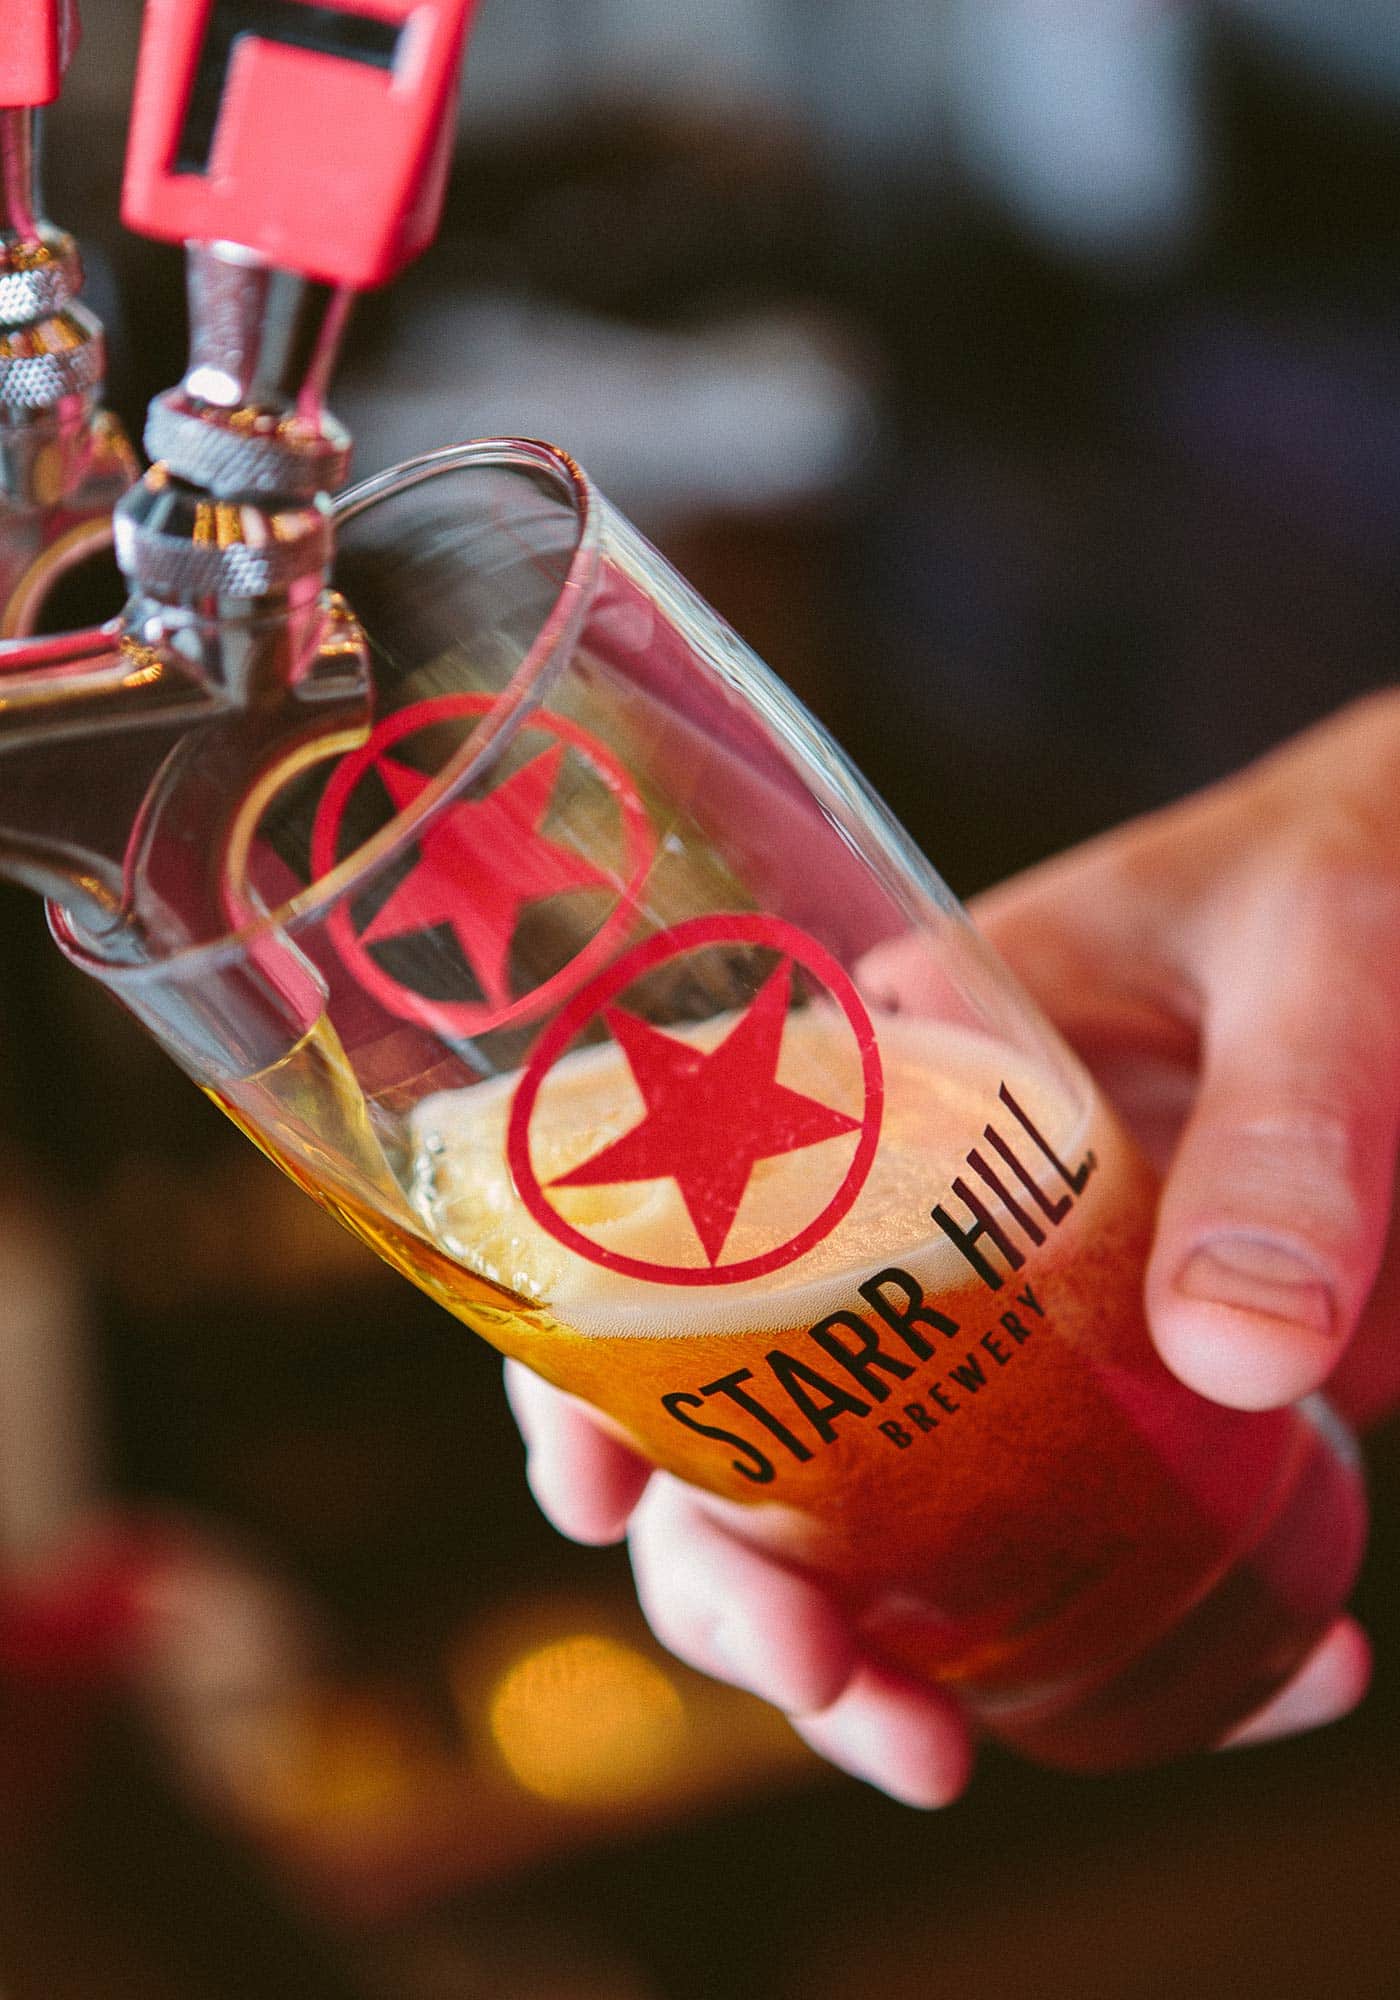 Starr Hill Brewery, Image by © William Walker